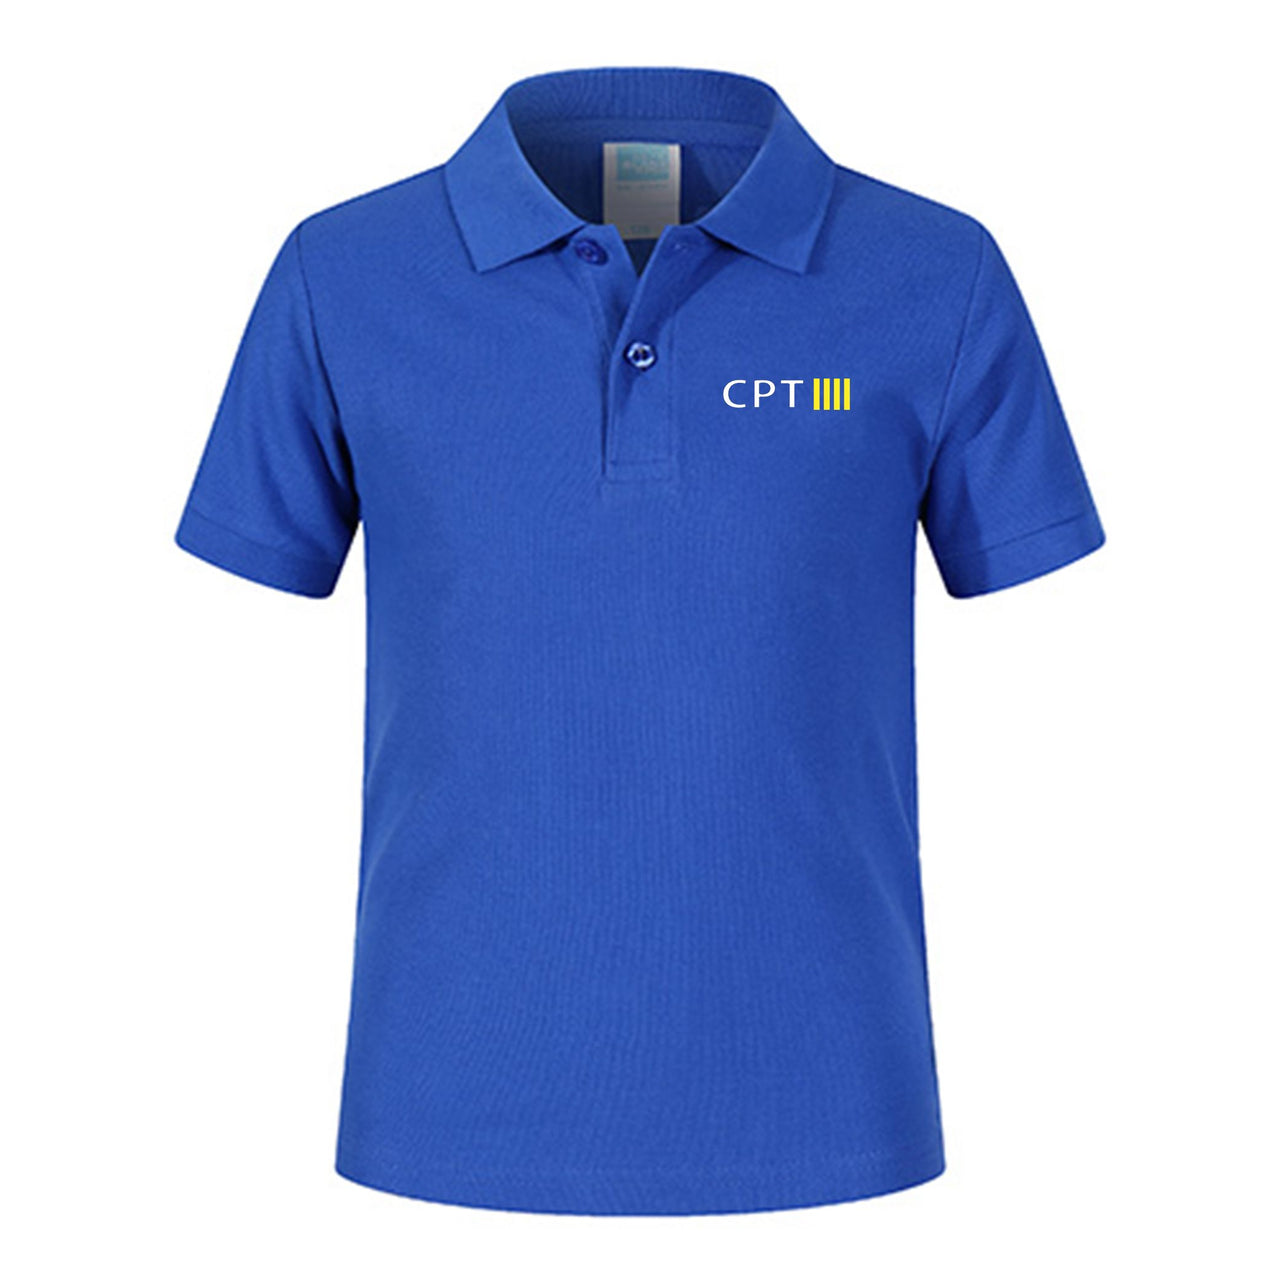 CPT & 4 Lines Designed Children Polo T-Shirts